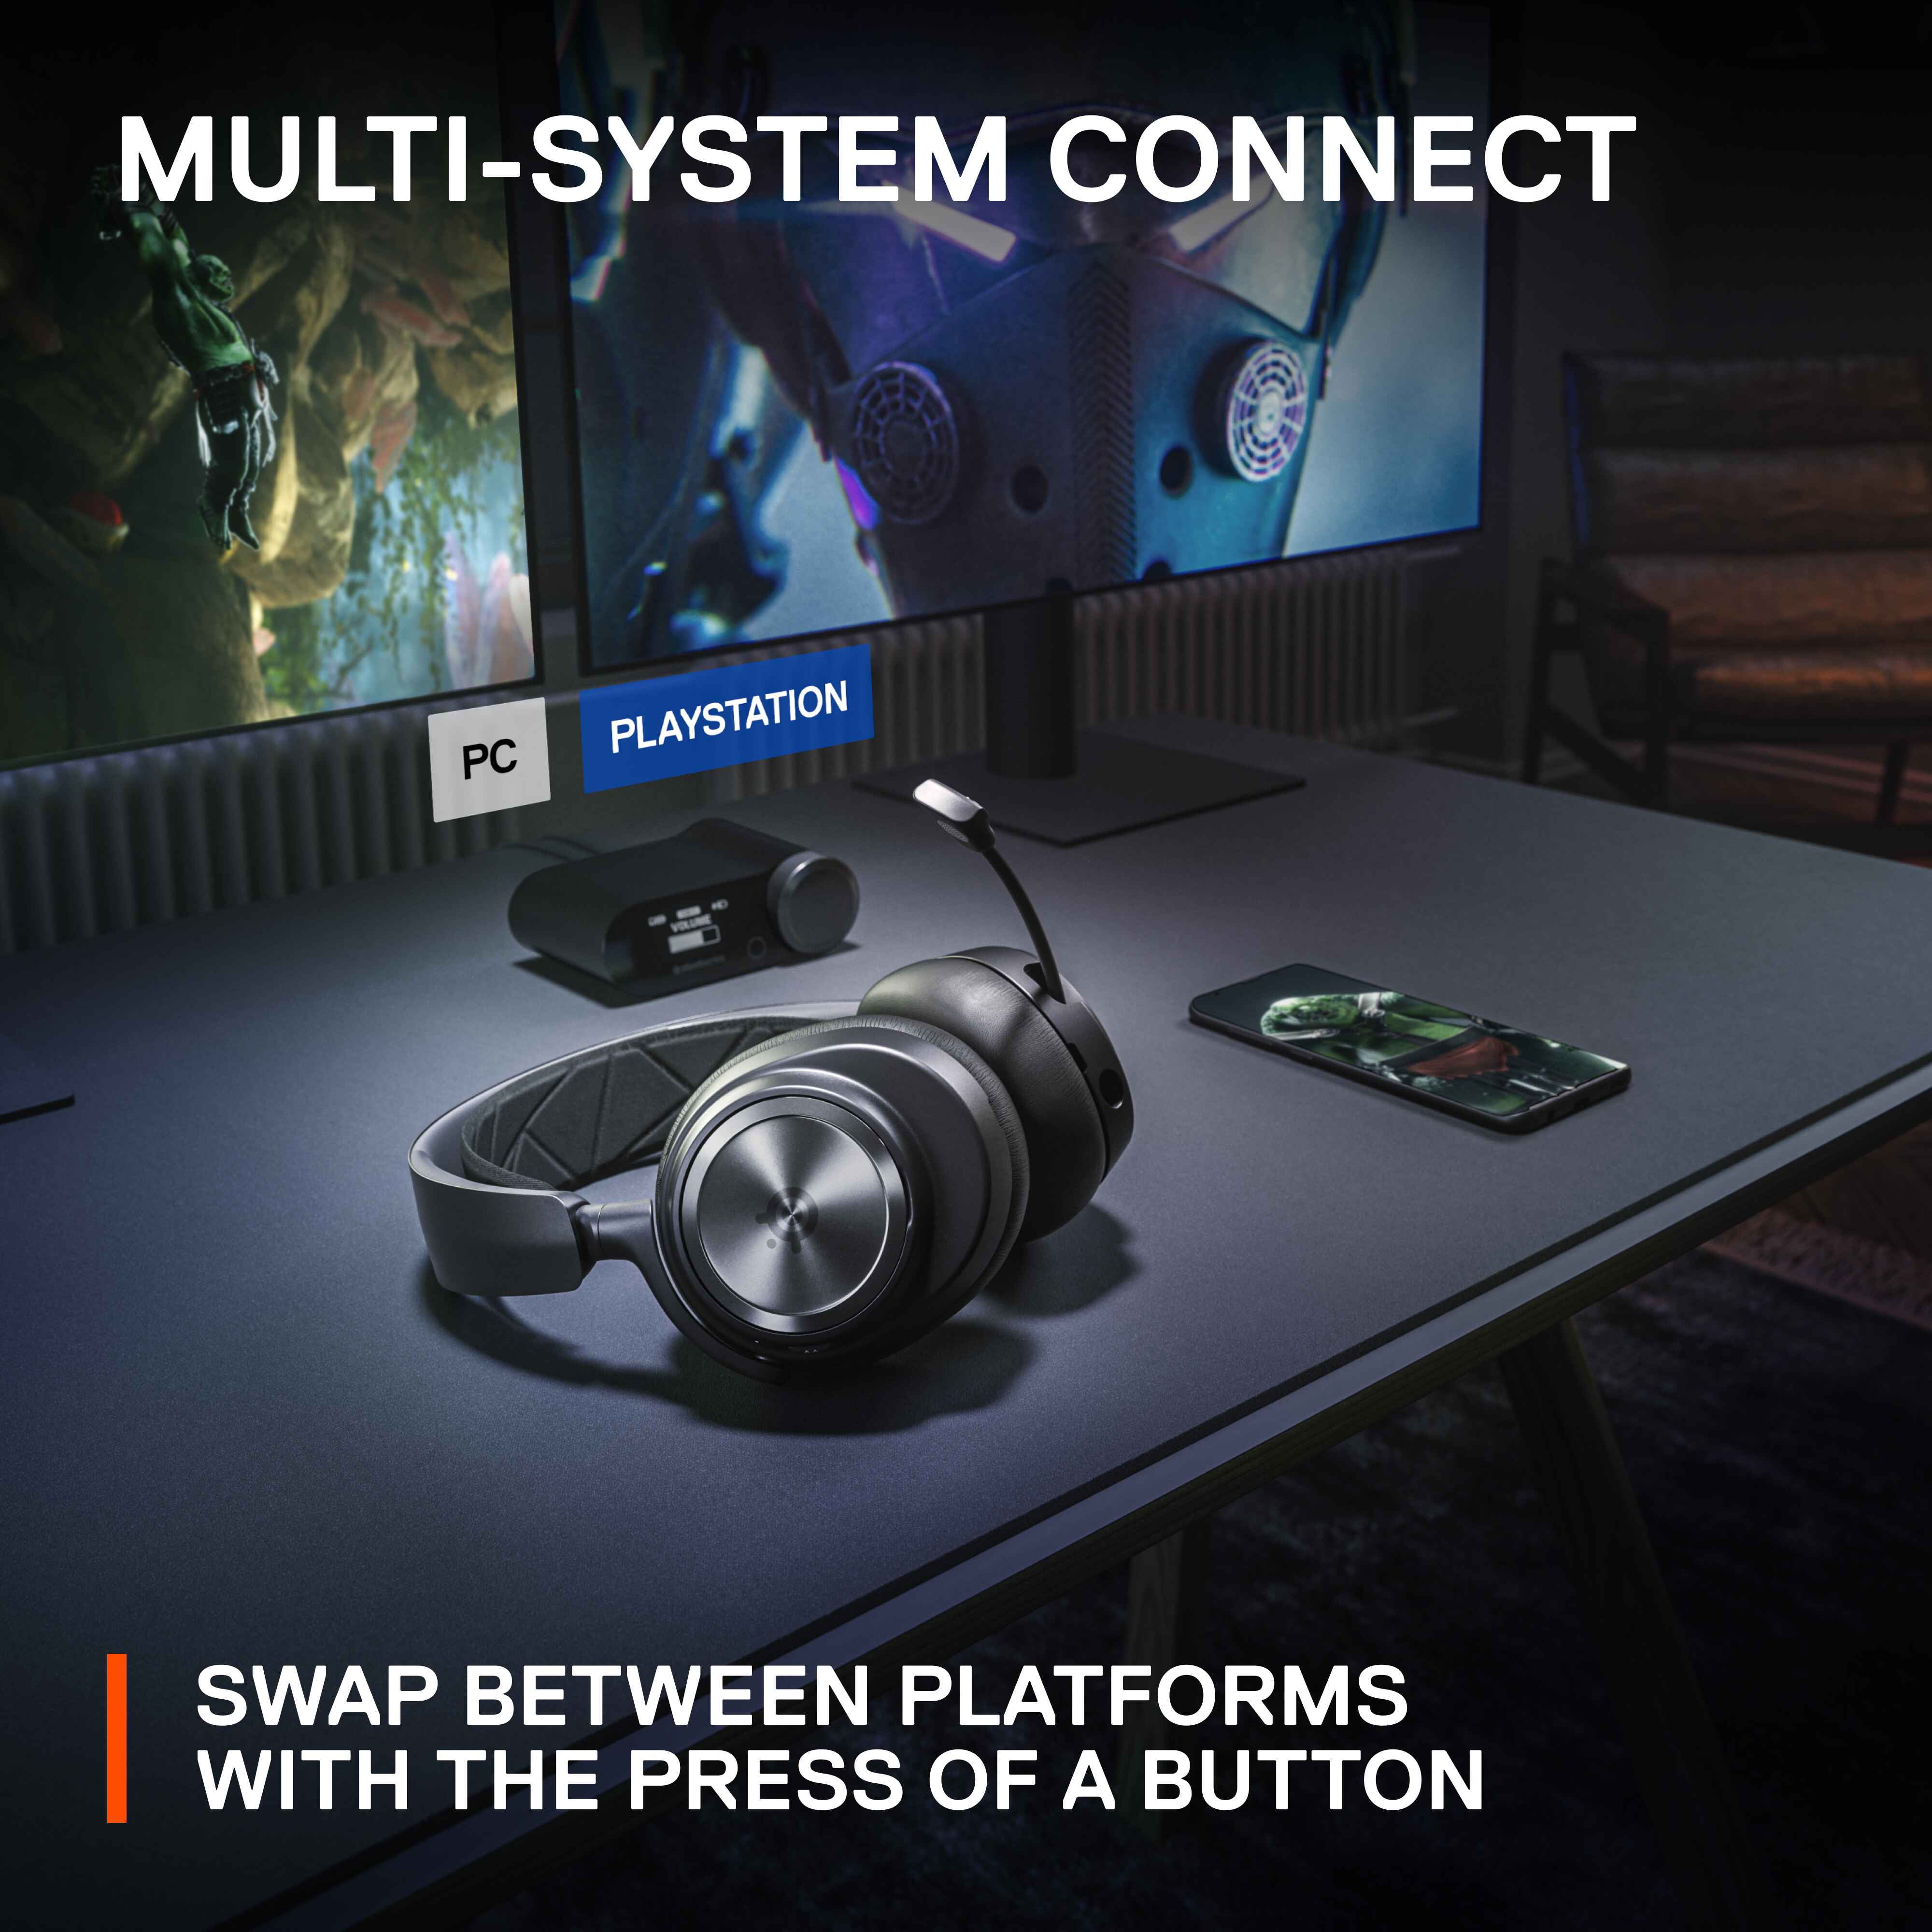 SteelSeries Arctis Nova Pro Wireless Multi-System Gaming Headset - Premium  Hi-Fi Drivers - Active Noise Cancellation - Infinity Power System -  ClearCast Gen 2 Mic - PC, PS5, PS4, Switch, Mobile